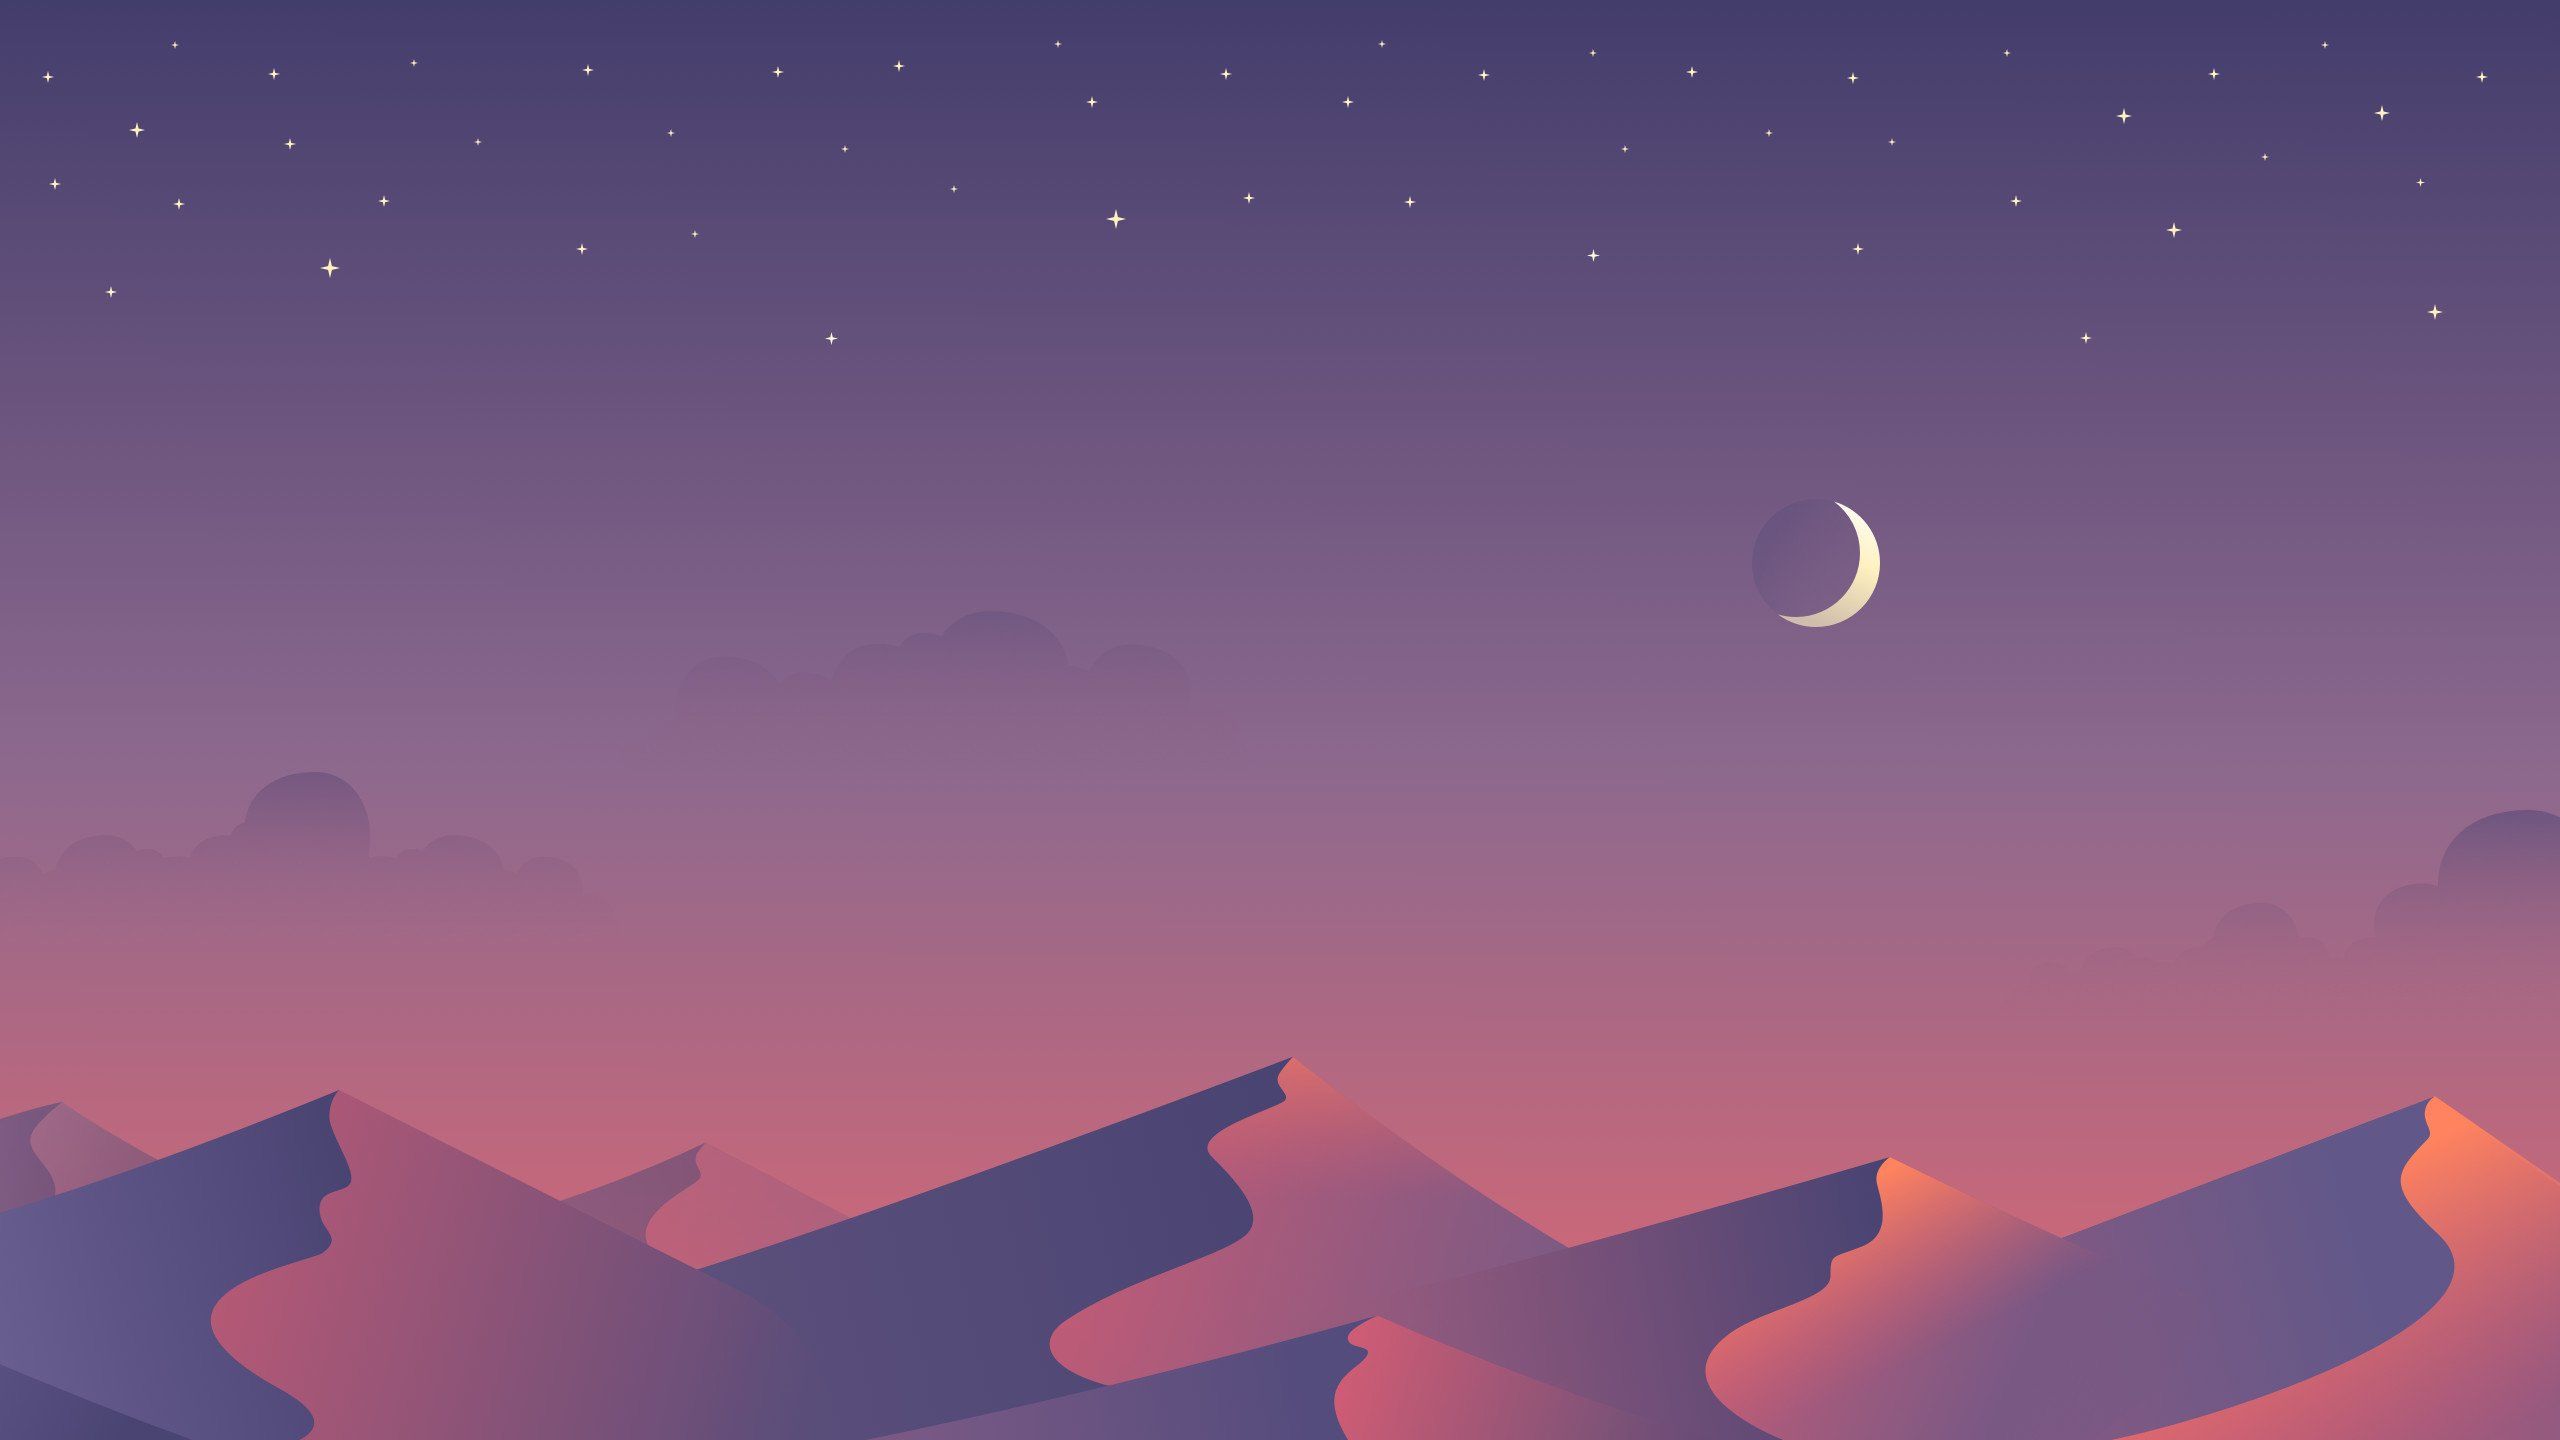 A landscape with mountains and the moon - IPad